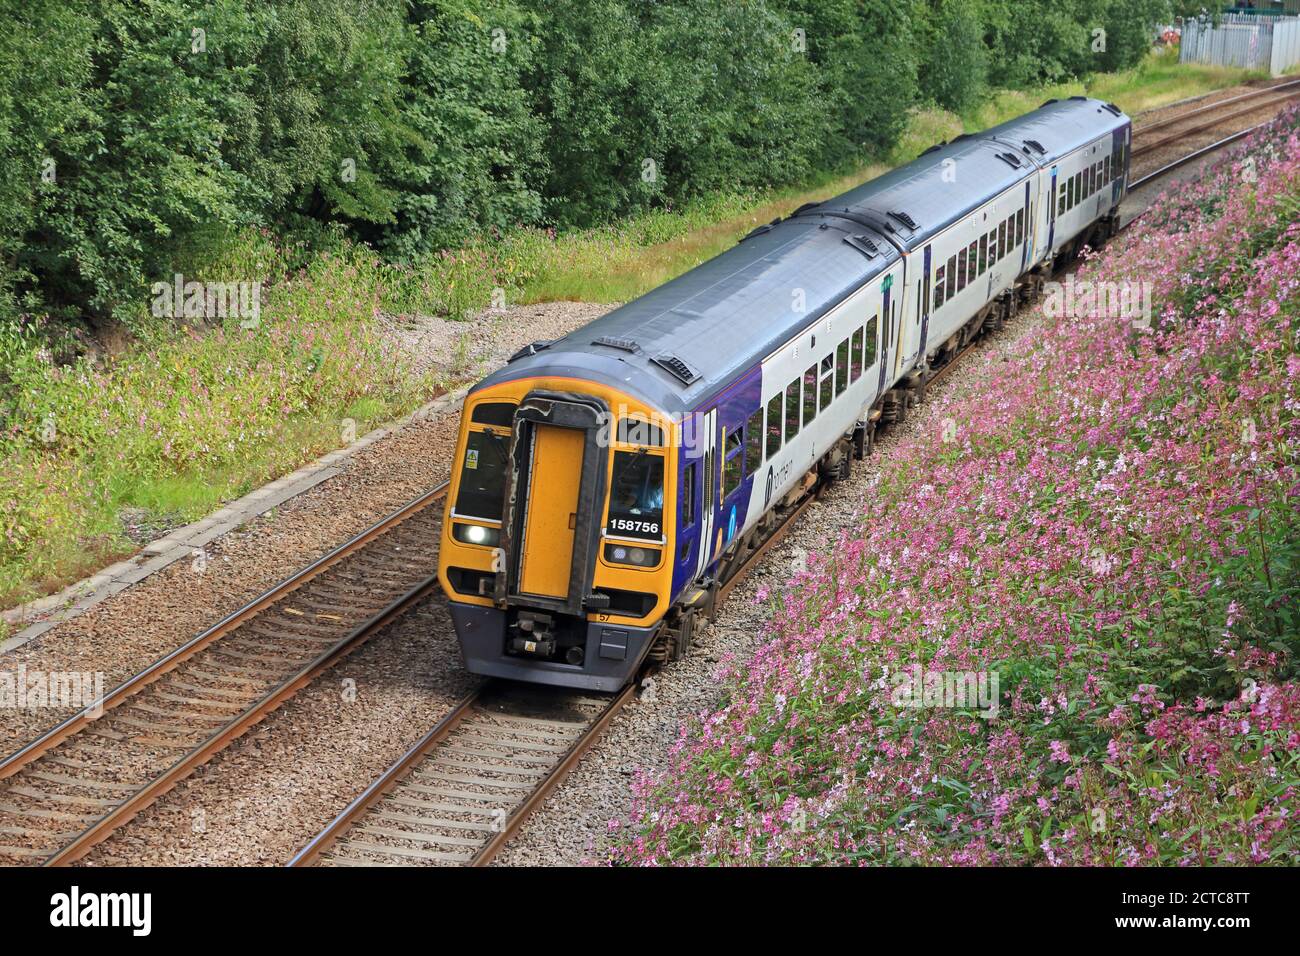 Northern Rail Express class 158 Sprinter train travelling on trans-pennine route Stock Photo